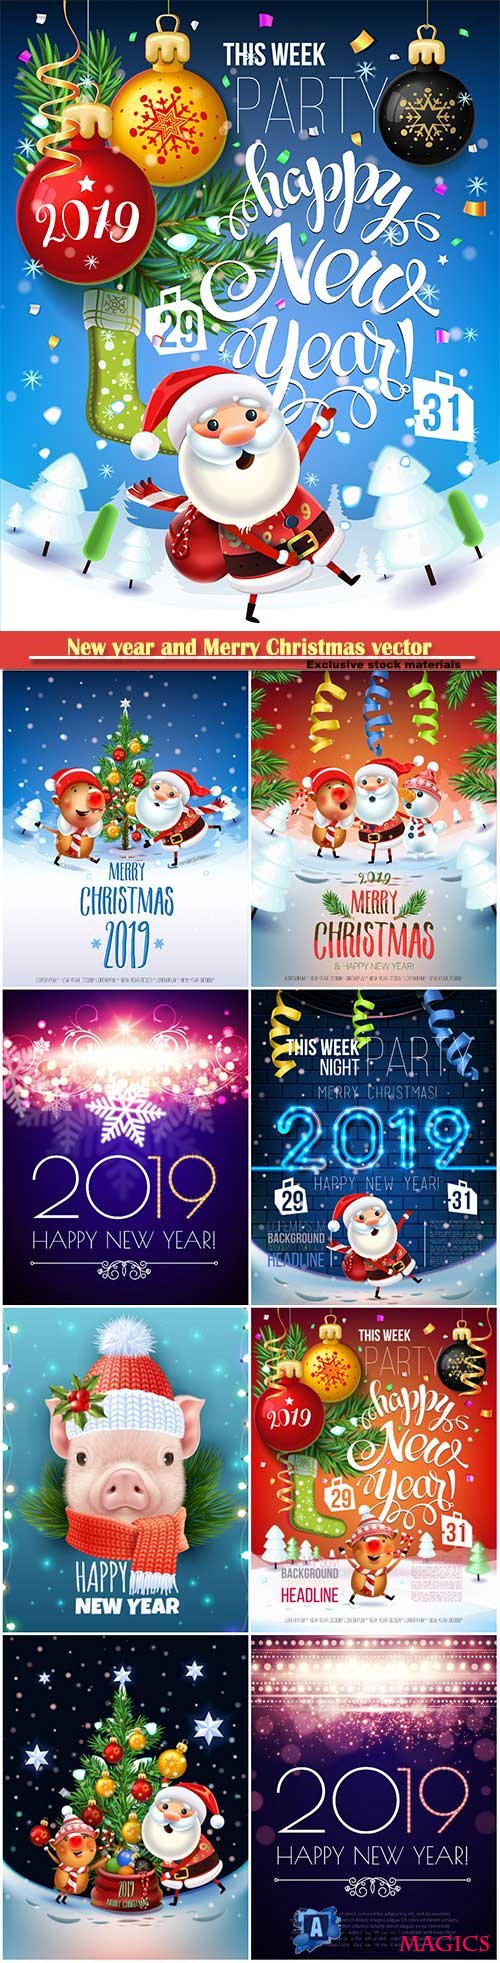 2019 New year and Merry Christmas poster card, Santa Claus, pig decorate the Christmas tree